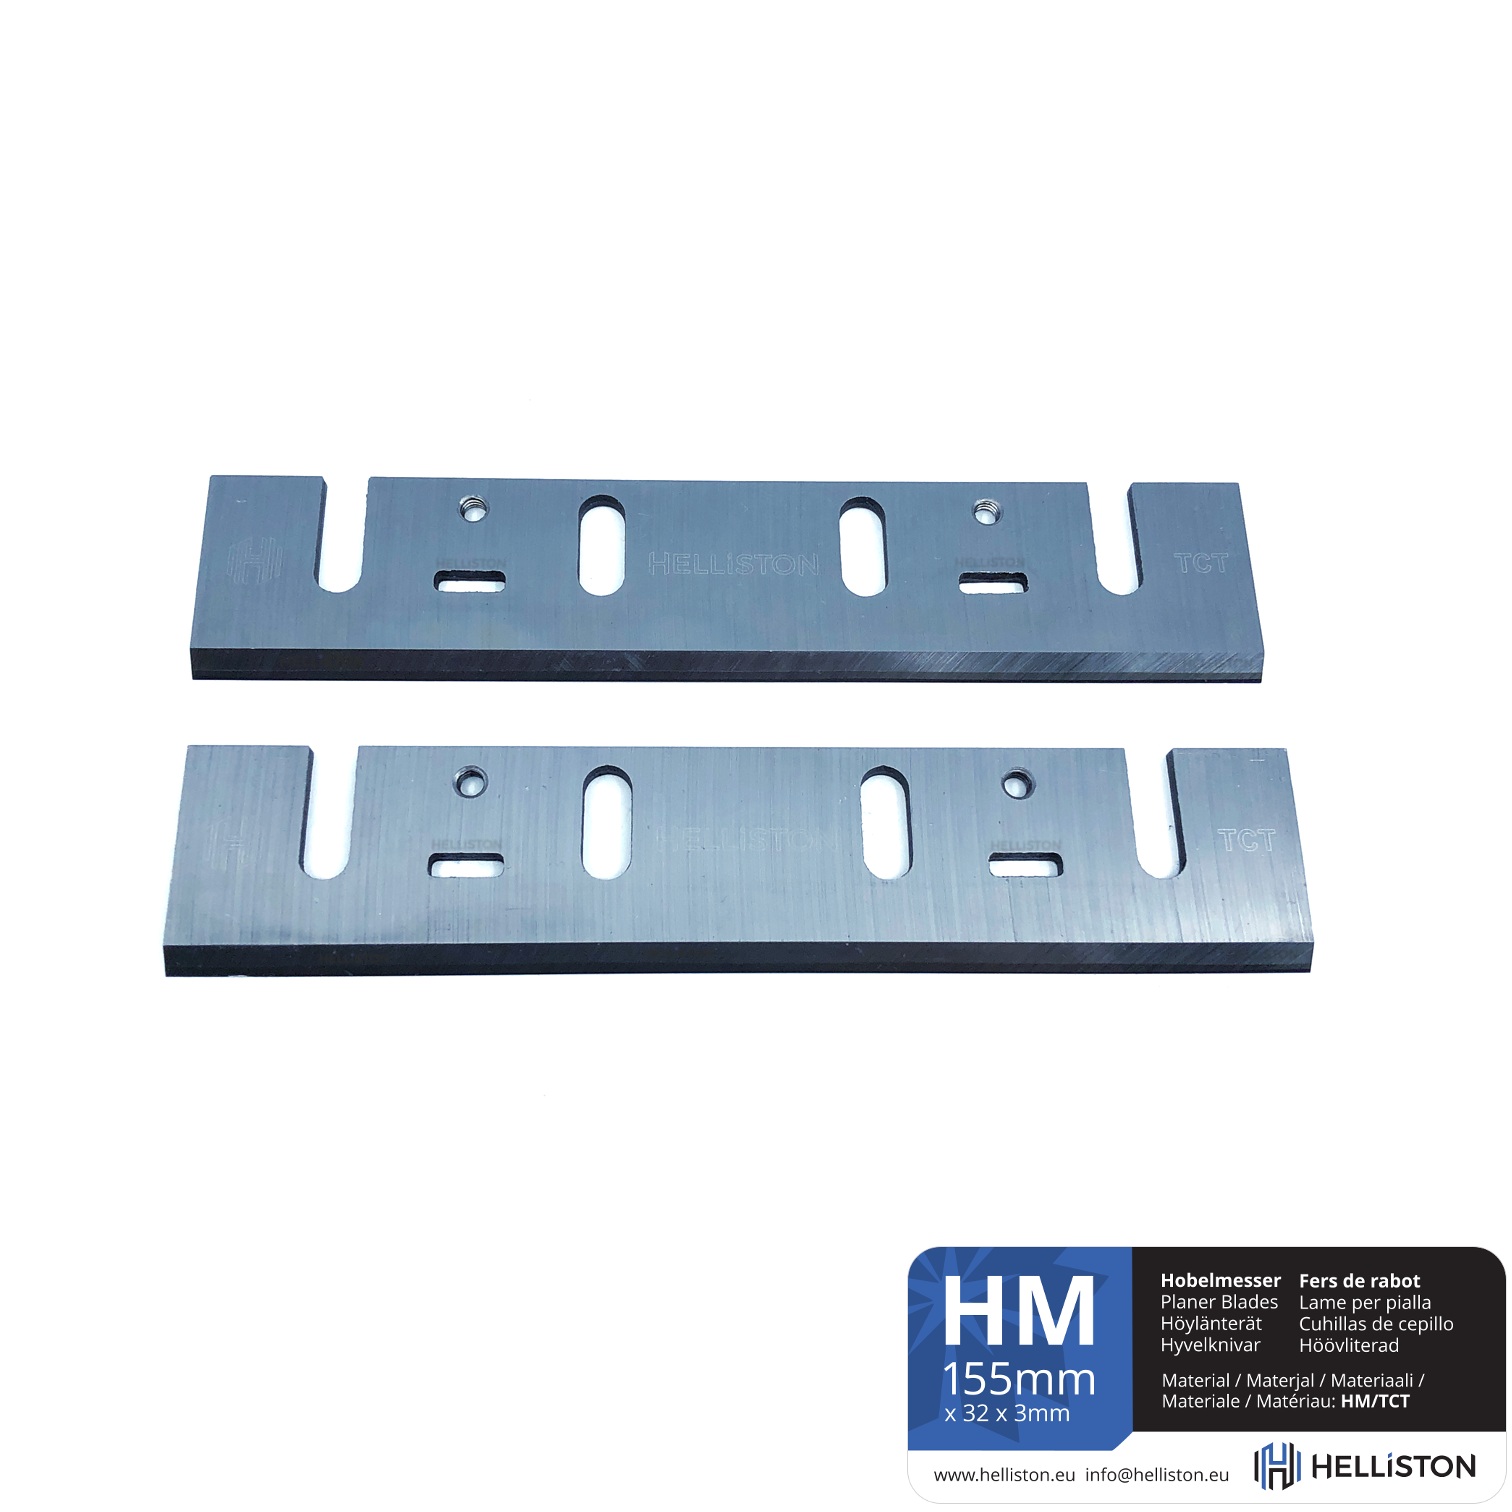 HM Planer Blades 155 x 32 x 3mm, Wolframcarbid, Tungsten Carbide Blades, Hard metal, Makita, 1805, 1805B, 1805N, Europe, Germany, England, Great Britain, France, de, fr, co.uk, resharpanable, sharpanple, planer blade sharping, sharp, durable, Canada, USA, Australia, Carpentry, woodworking, UK, electric hand planer, review, rewiev, parts, power planer, manual